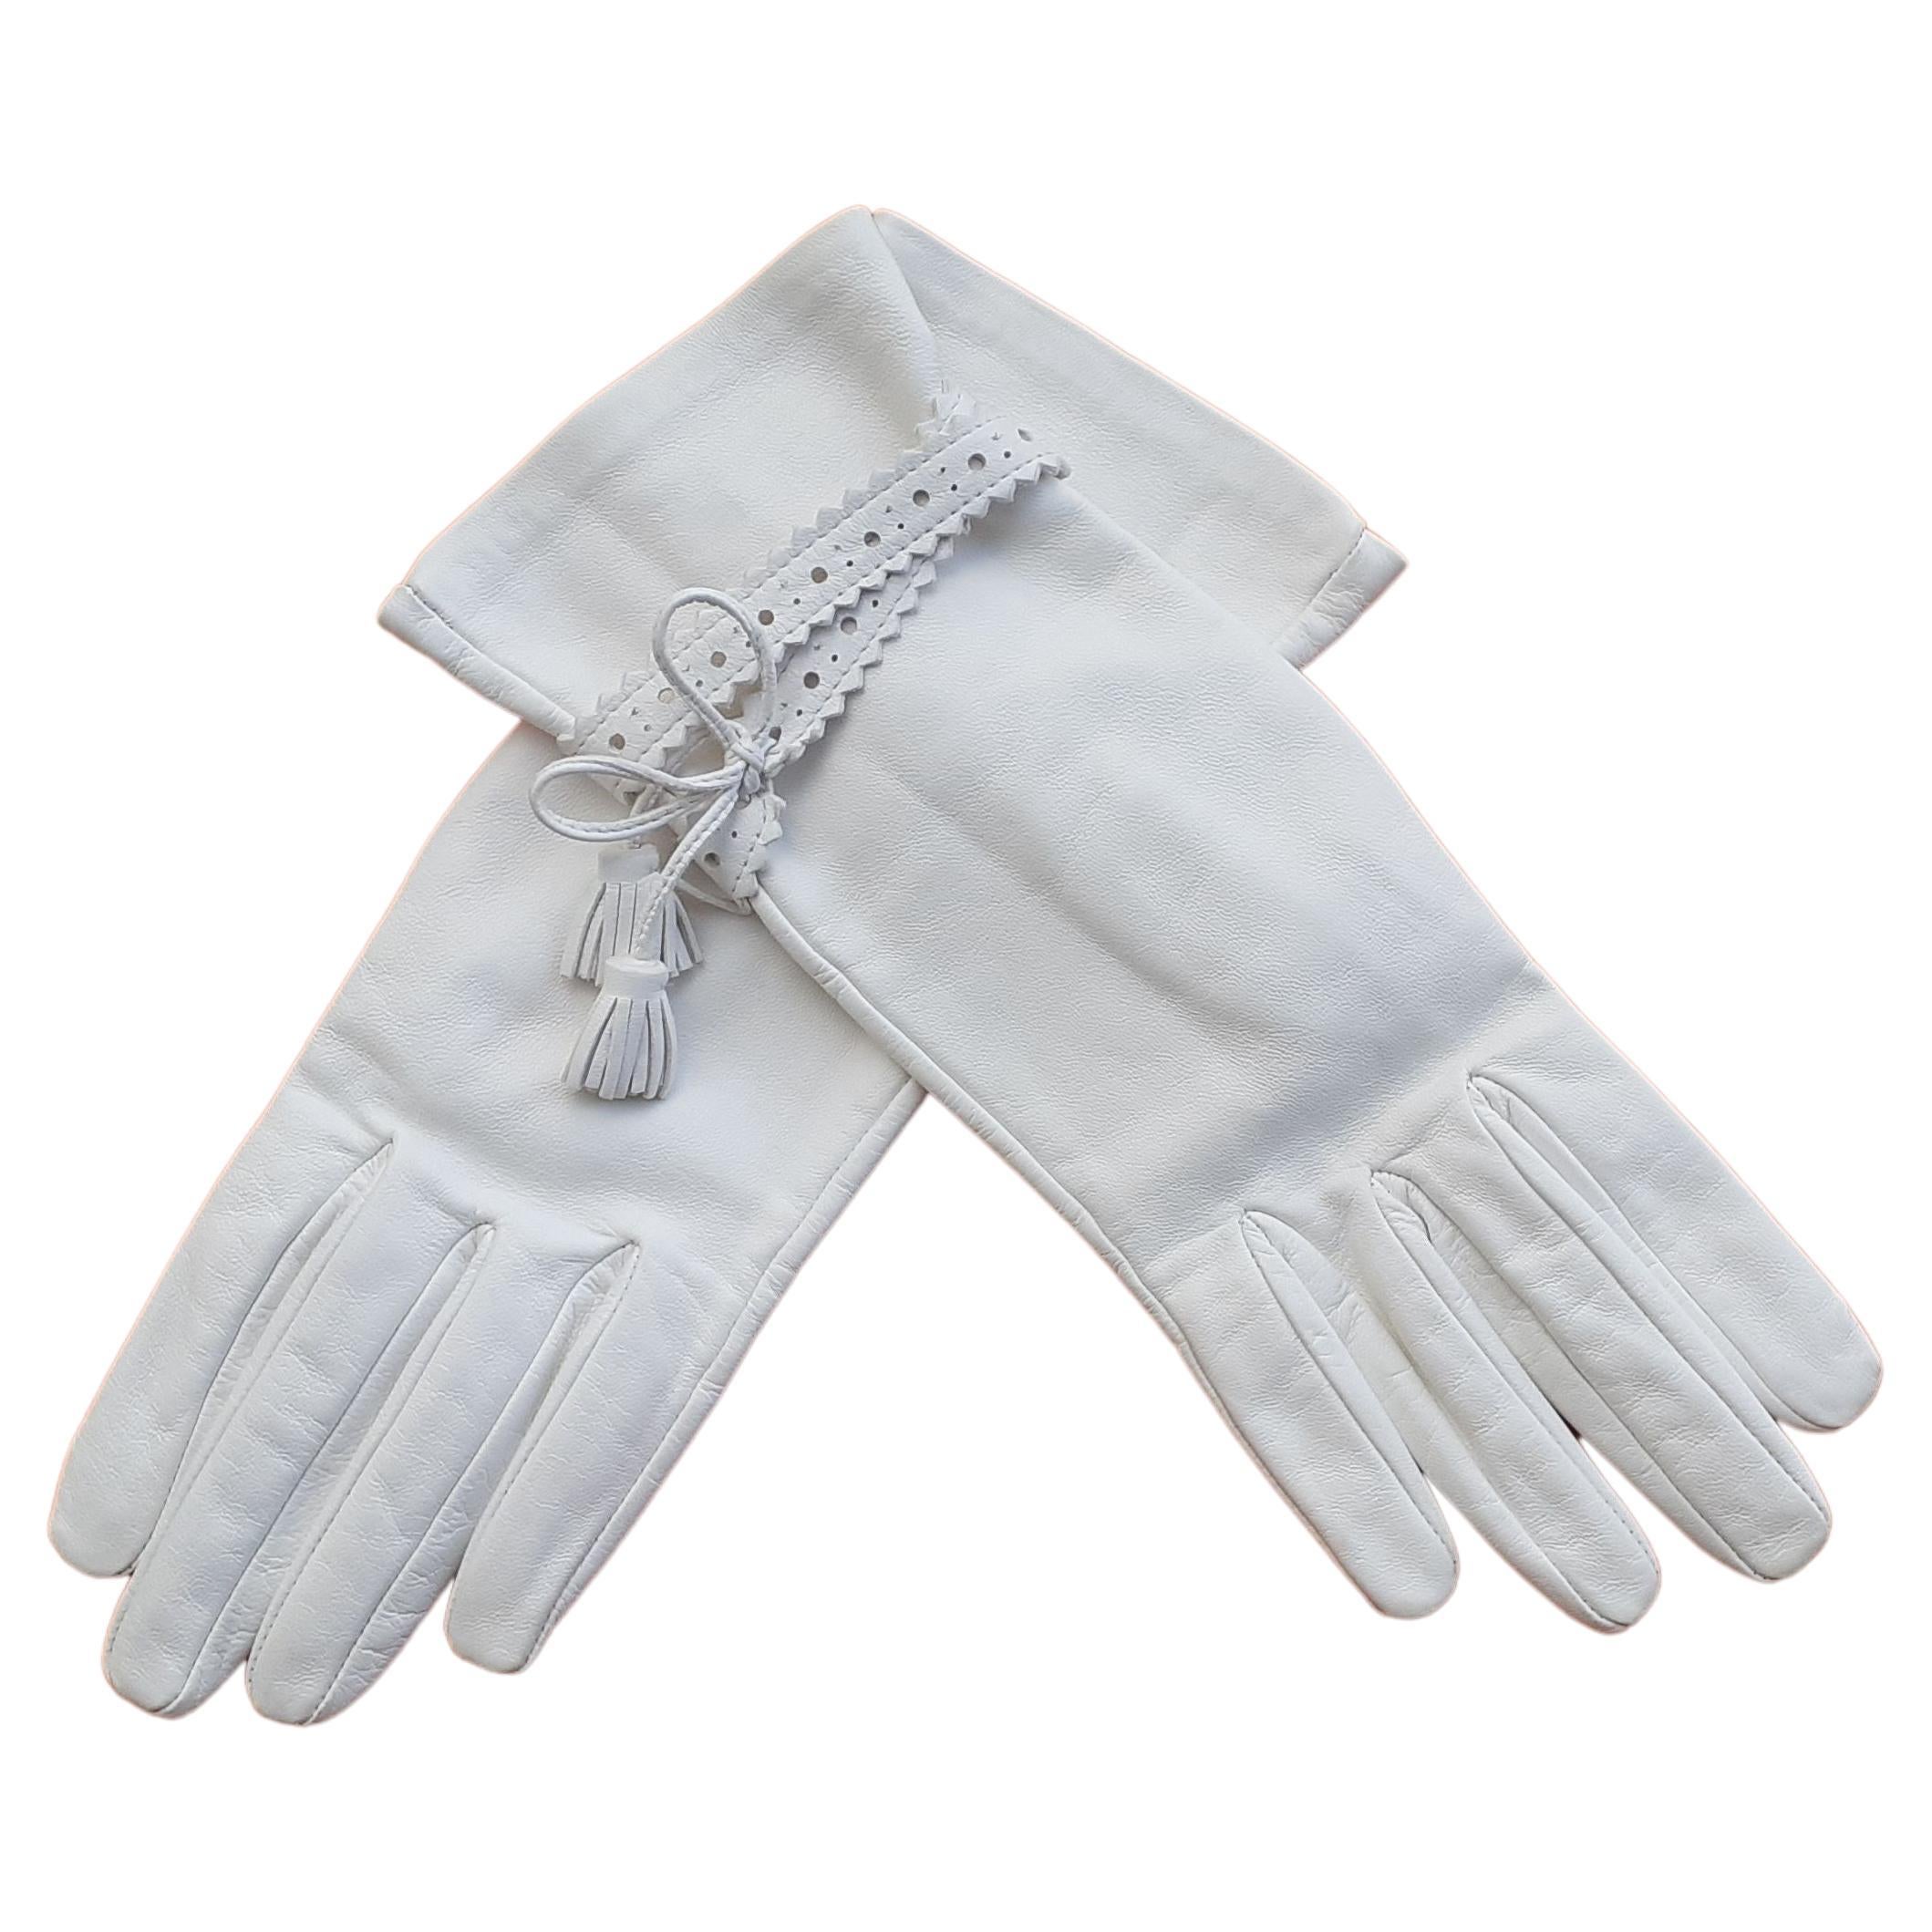 Lovely Hermès White Leather and Silk Gloves Ghillies Size 6.5 For Sale